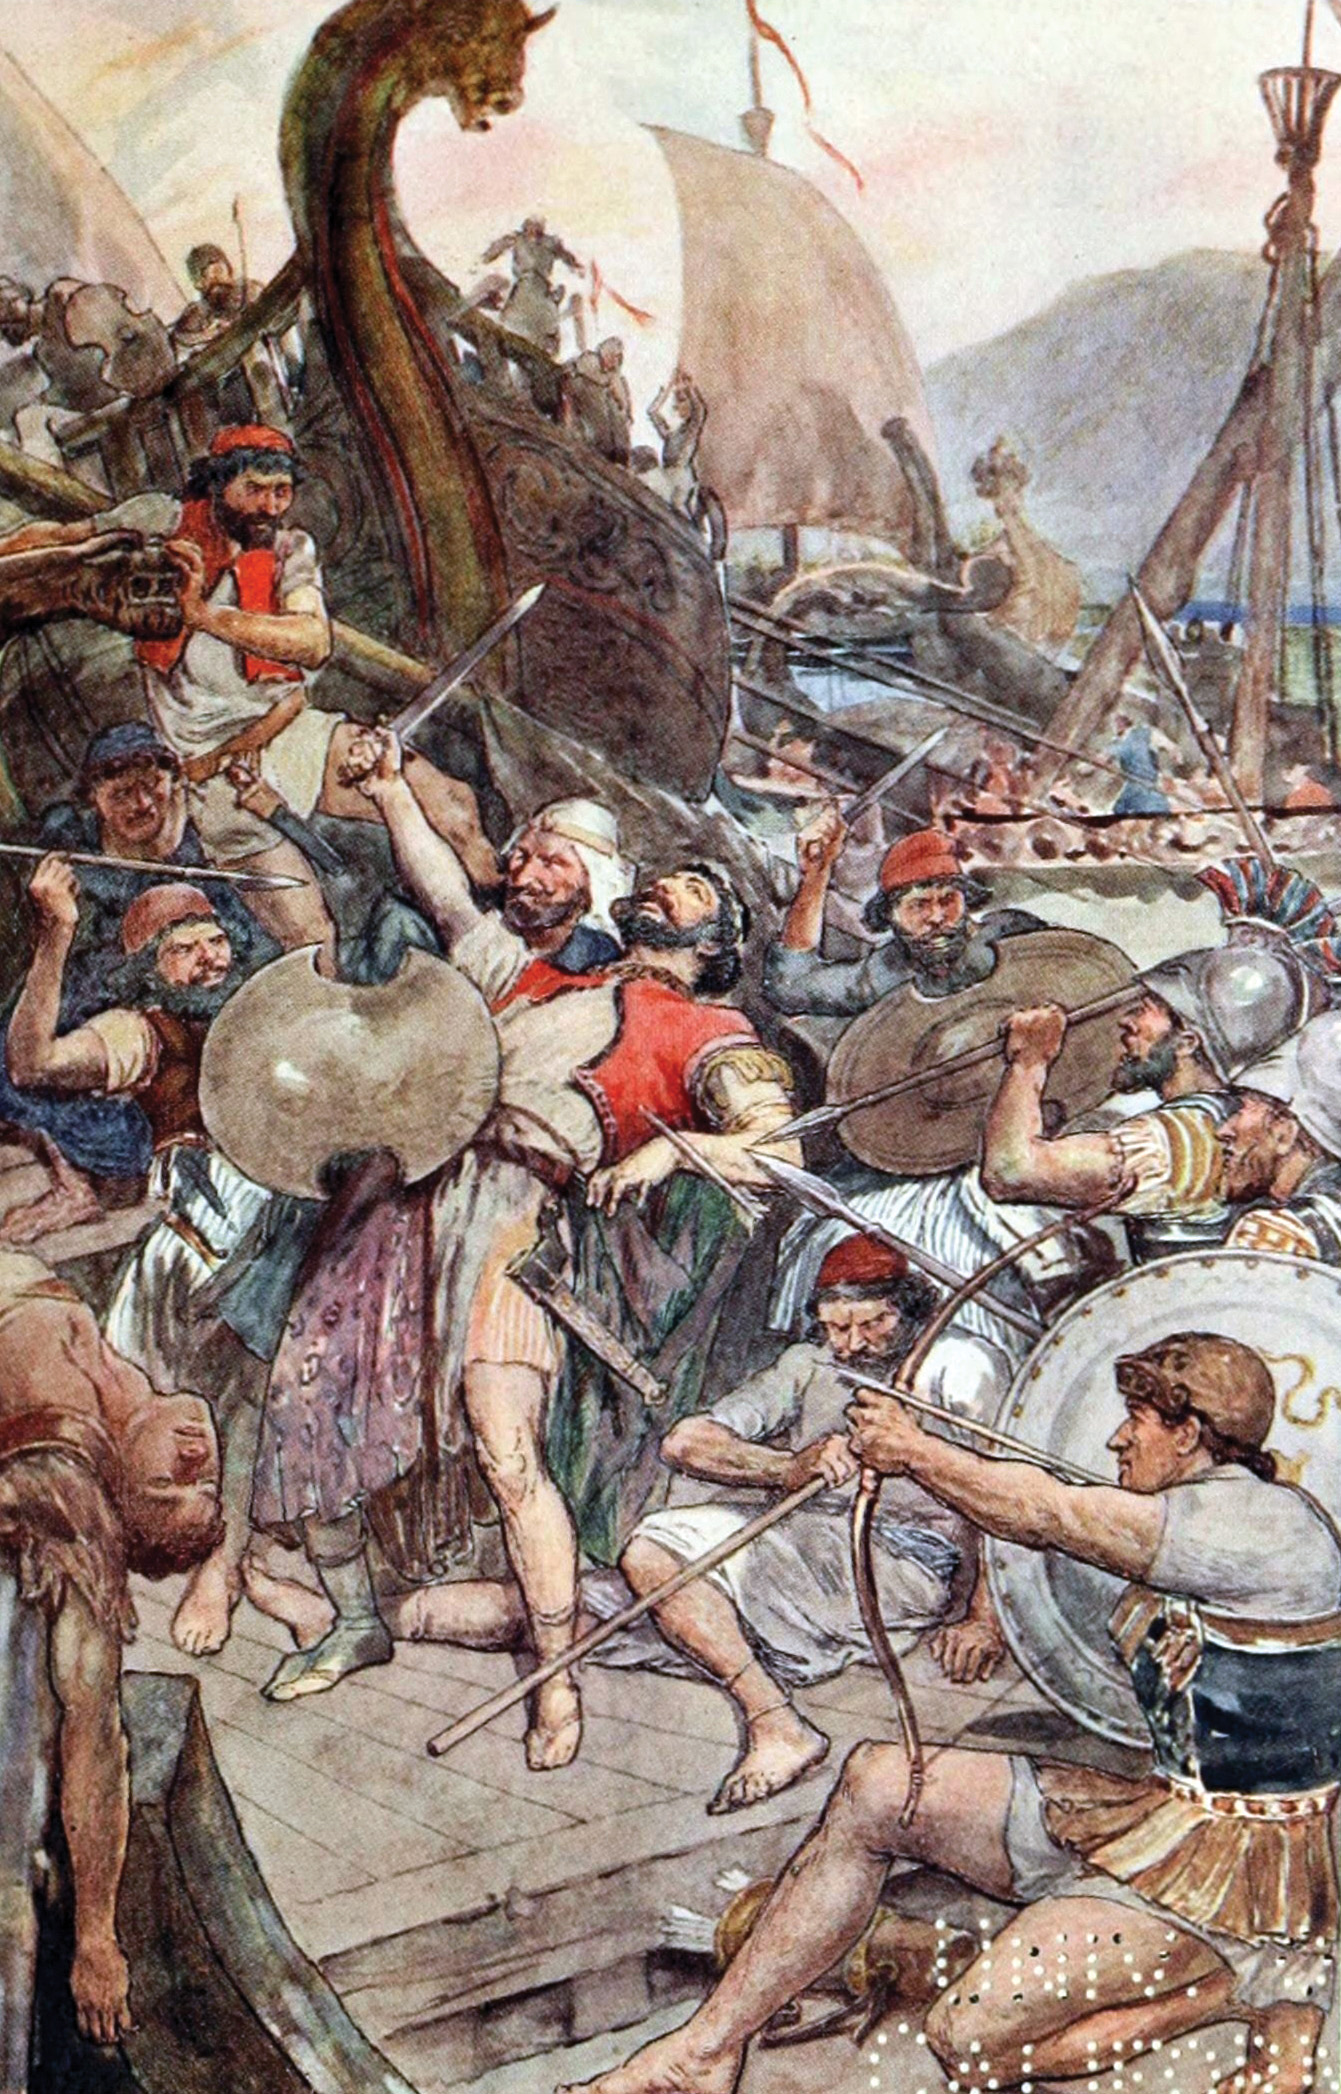 Ariabignes, a Persian admiral and Xerxes’ half brother, is slain by spear thrusts during a melee that ensued when the Greeks rammed his flagship.